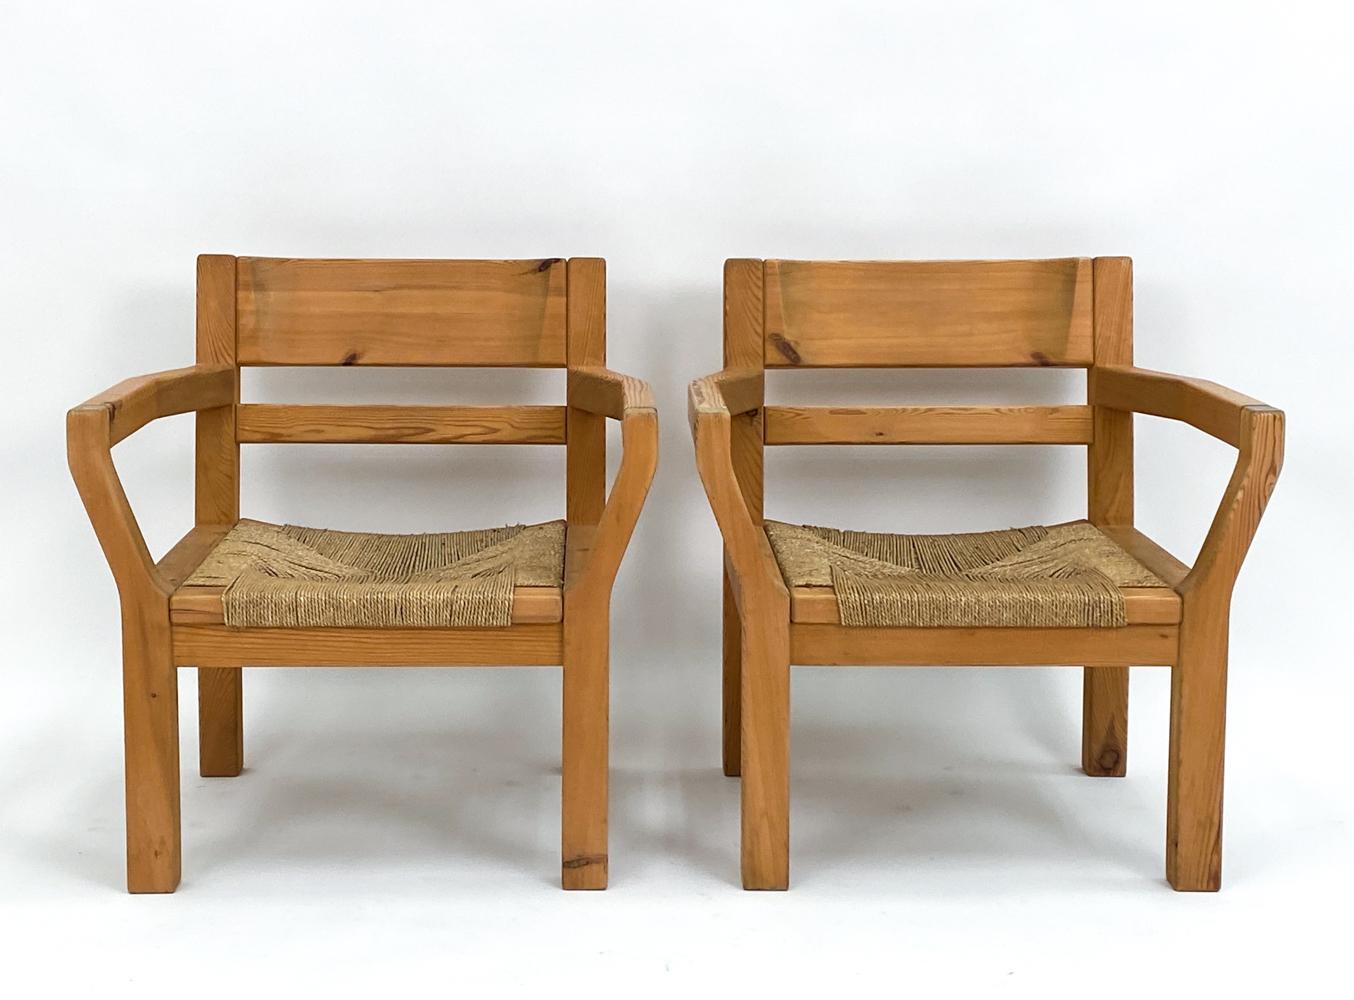 Pair of Tage Poulsen Pine & Rush Seat Lounge Chairs, c. 1970's In Good Condition For Sale In Norwalk, CT